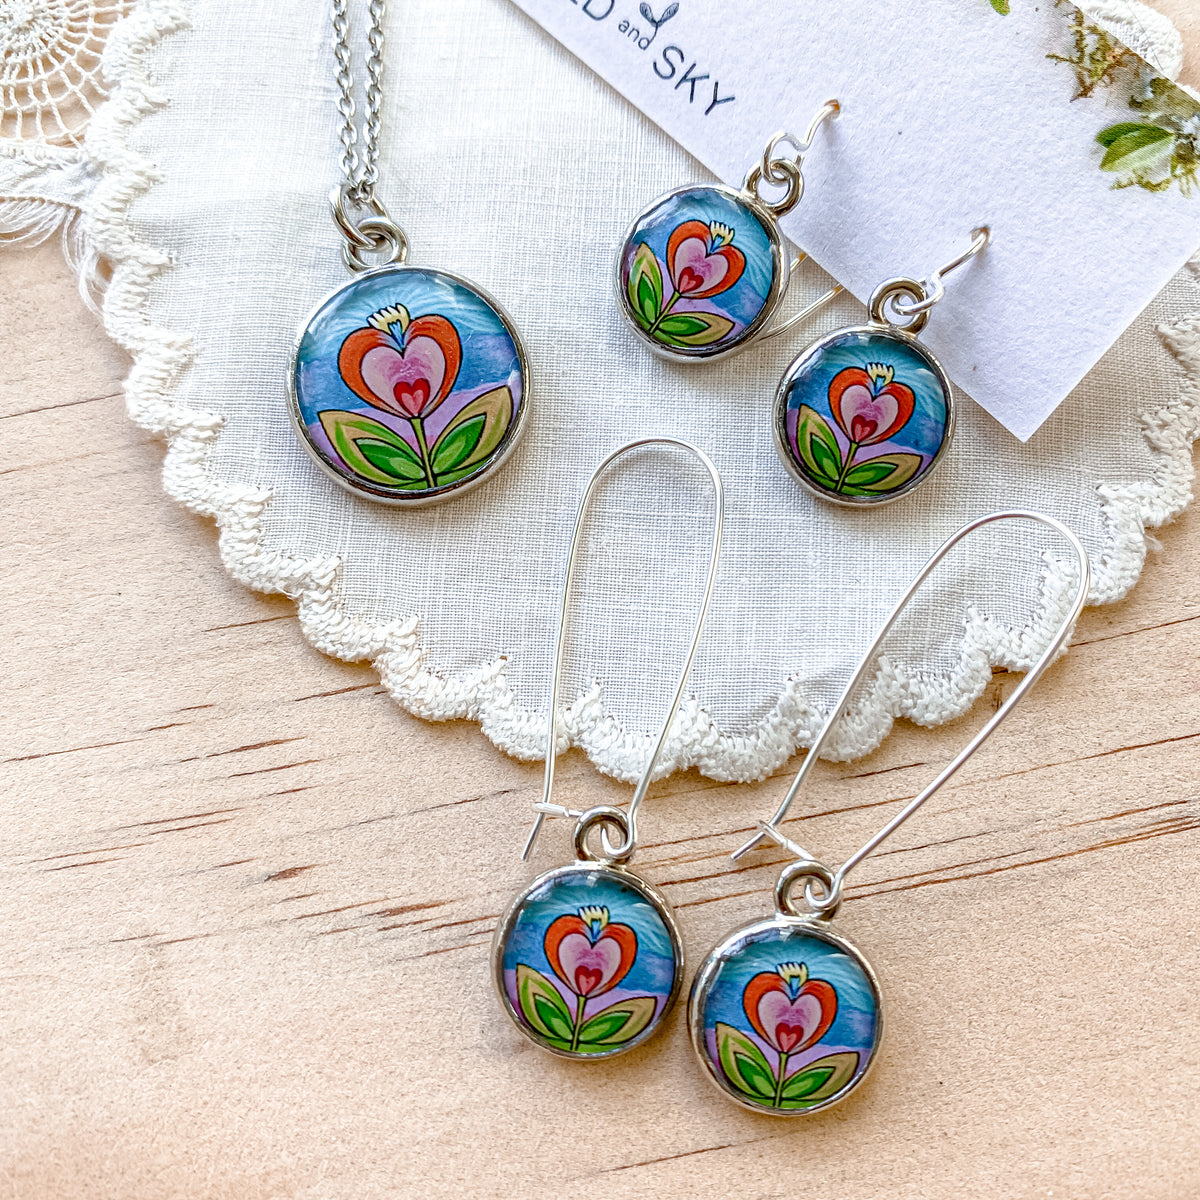 a set of three necklaces and earrings on a doily